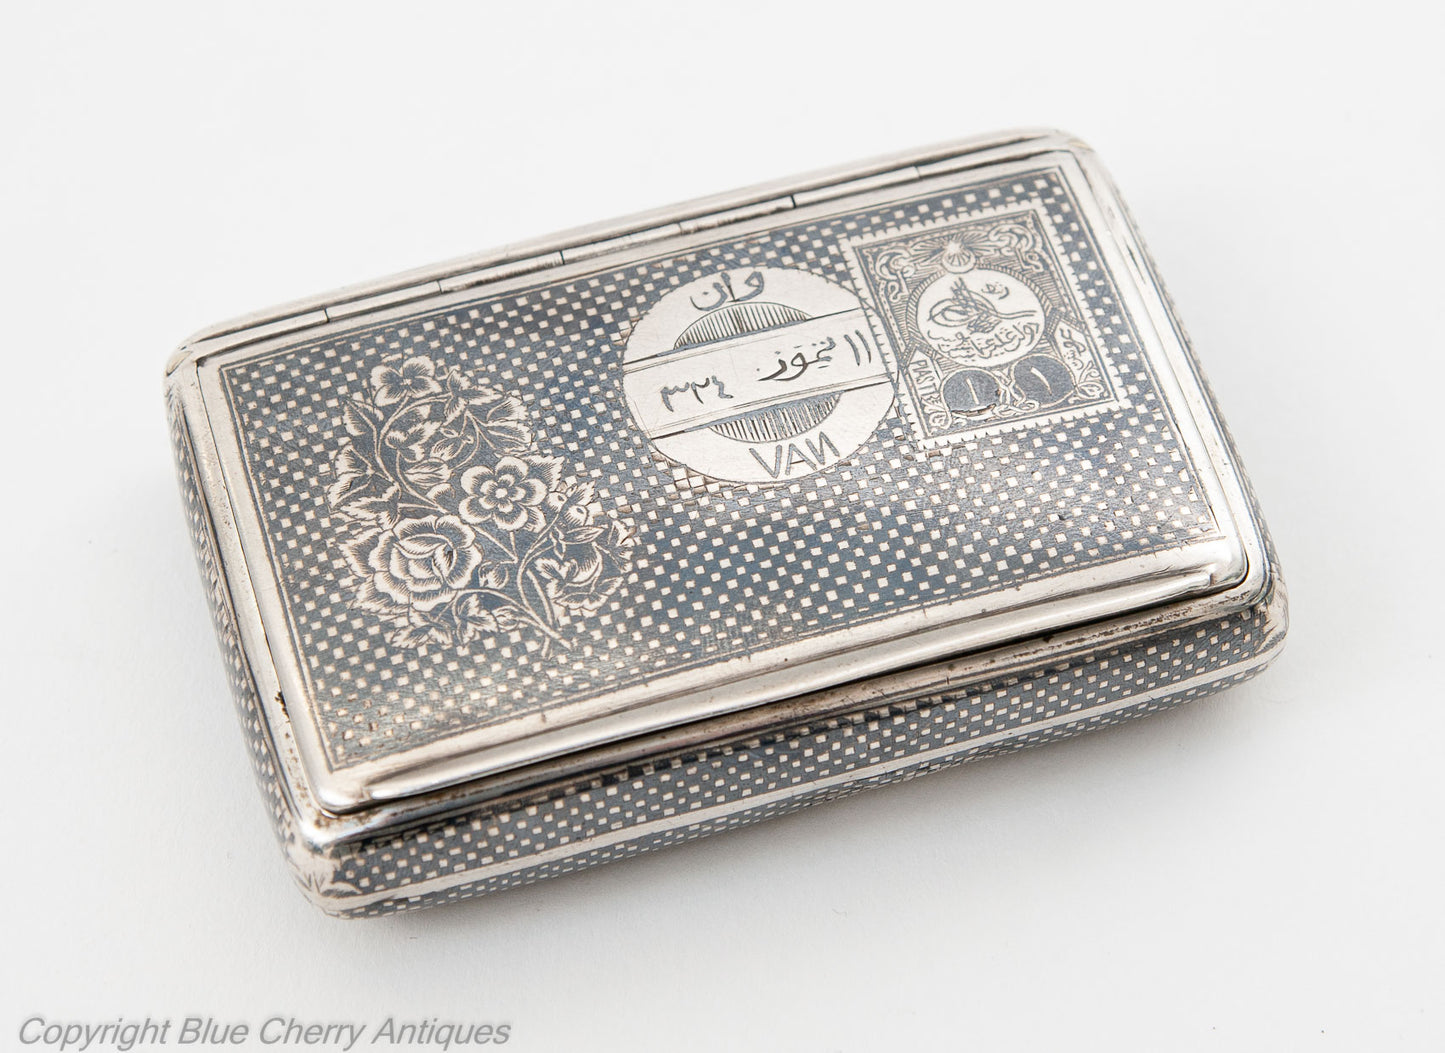 Antique Turkish Armenian Silver Niello Sweetheart Tobacco Case with Tughra Mark (Code 1836)